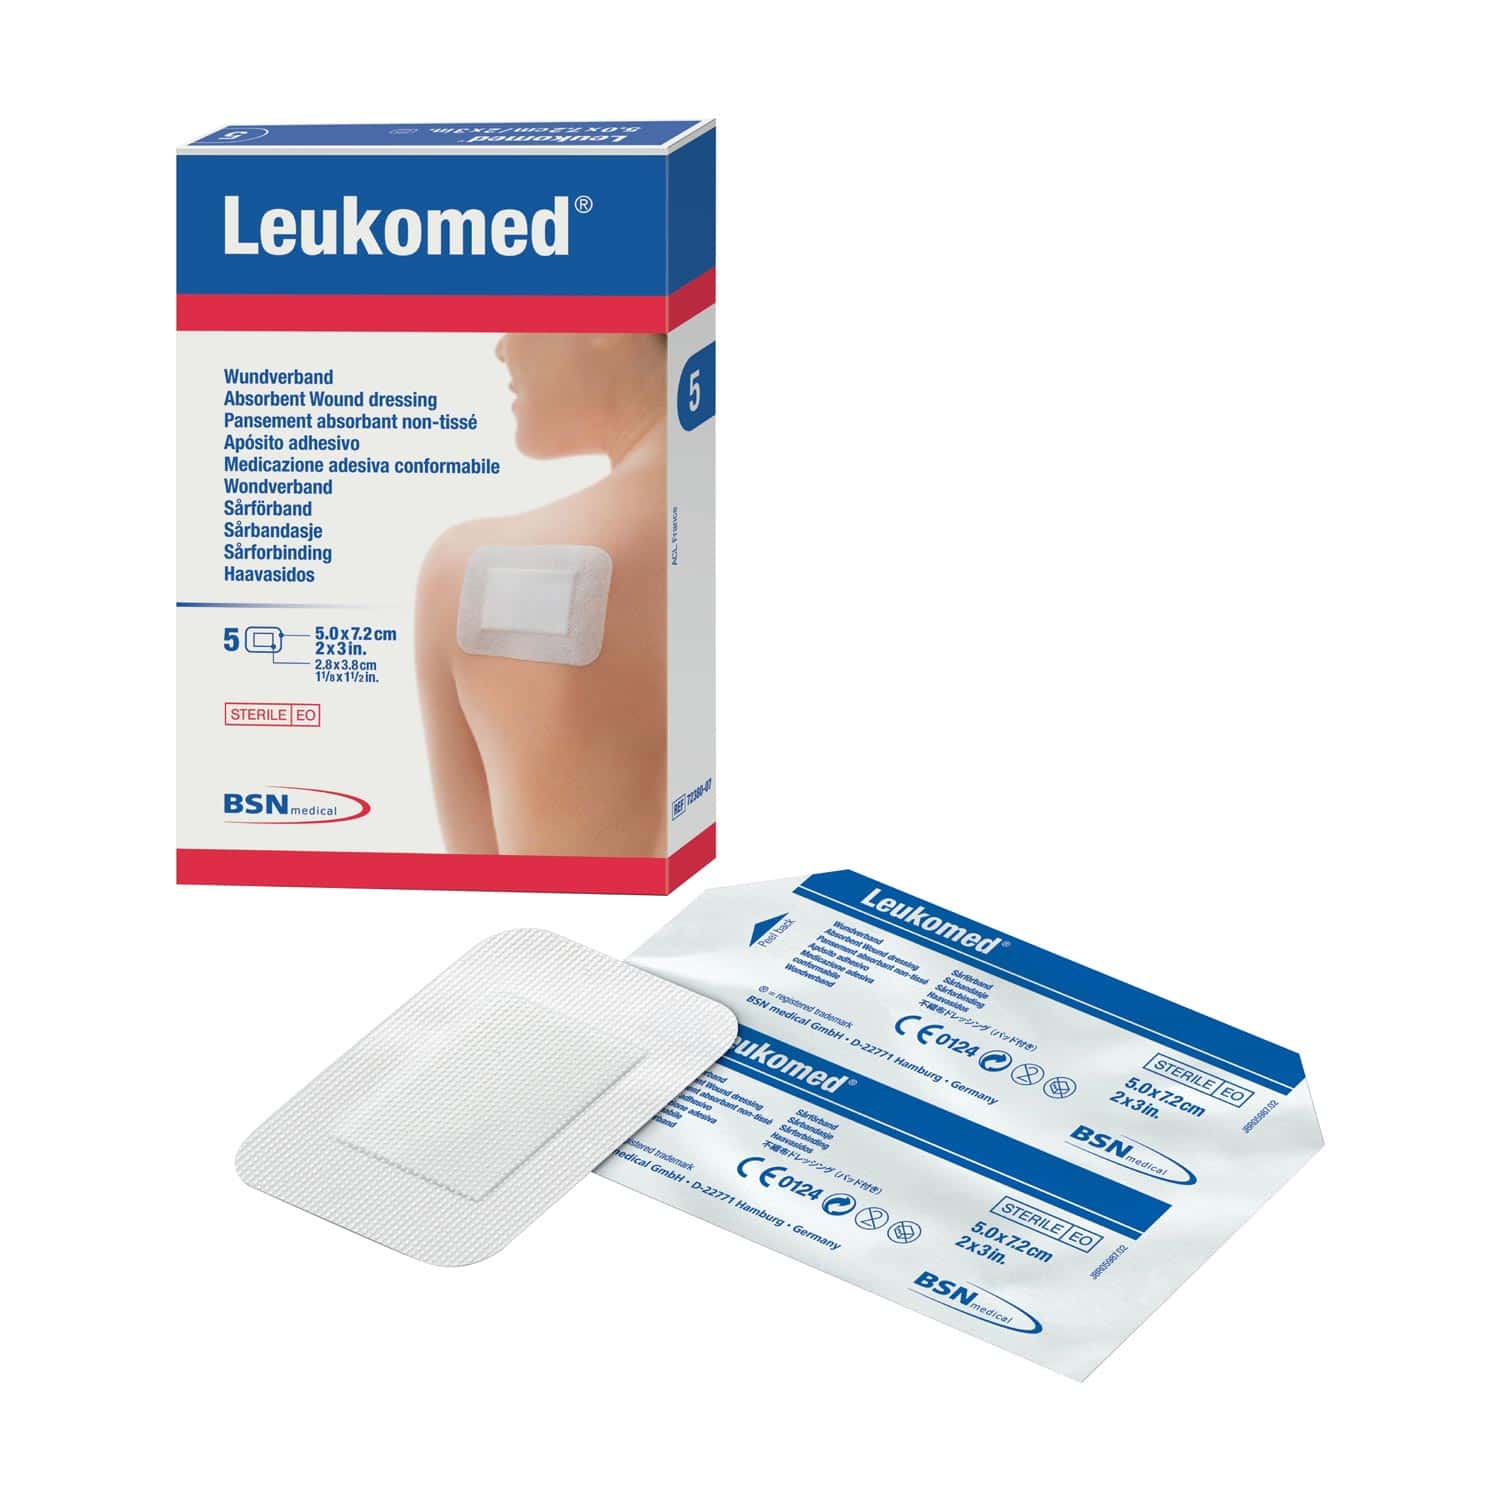 Leukomed Sterile – Transversely Elastic Wound Dressing Made From Polyester Fleece